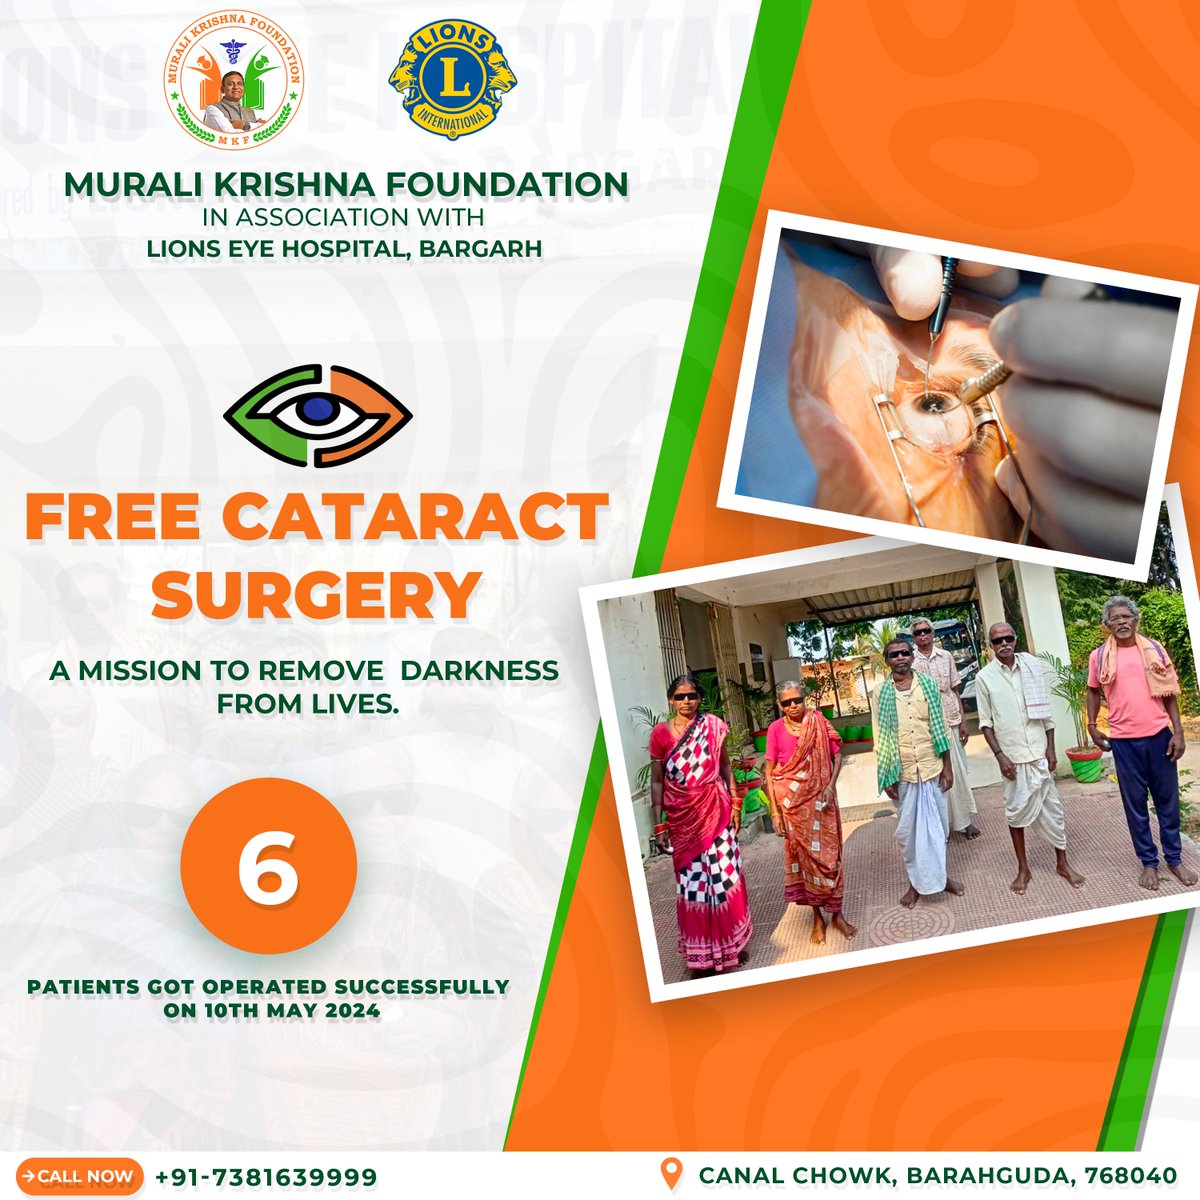 Empowering communities through vision restoration!

On 10 May 2024, Murali Krishna Foundation & Lions Eye Hospital, Bargarh, bring the transformative power of sight to 6 individuals in need.

#muralikrishnafoundation #mkf #dmuralikrishna  #Bargarh #eye #cataract #cataractsurgery